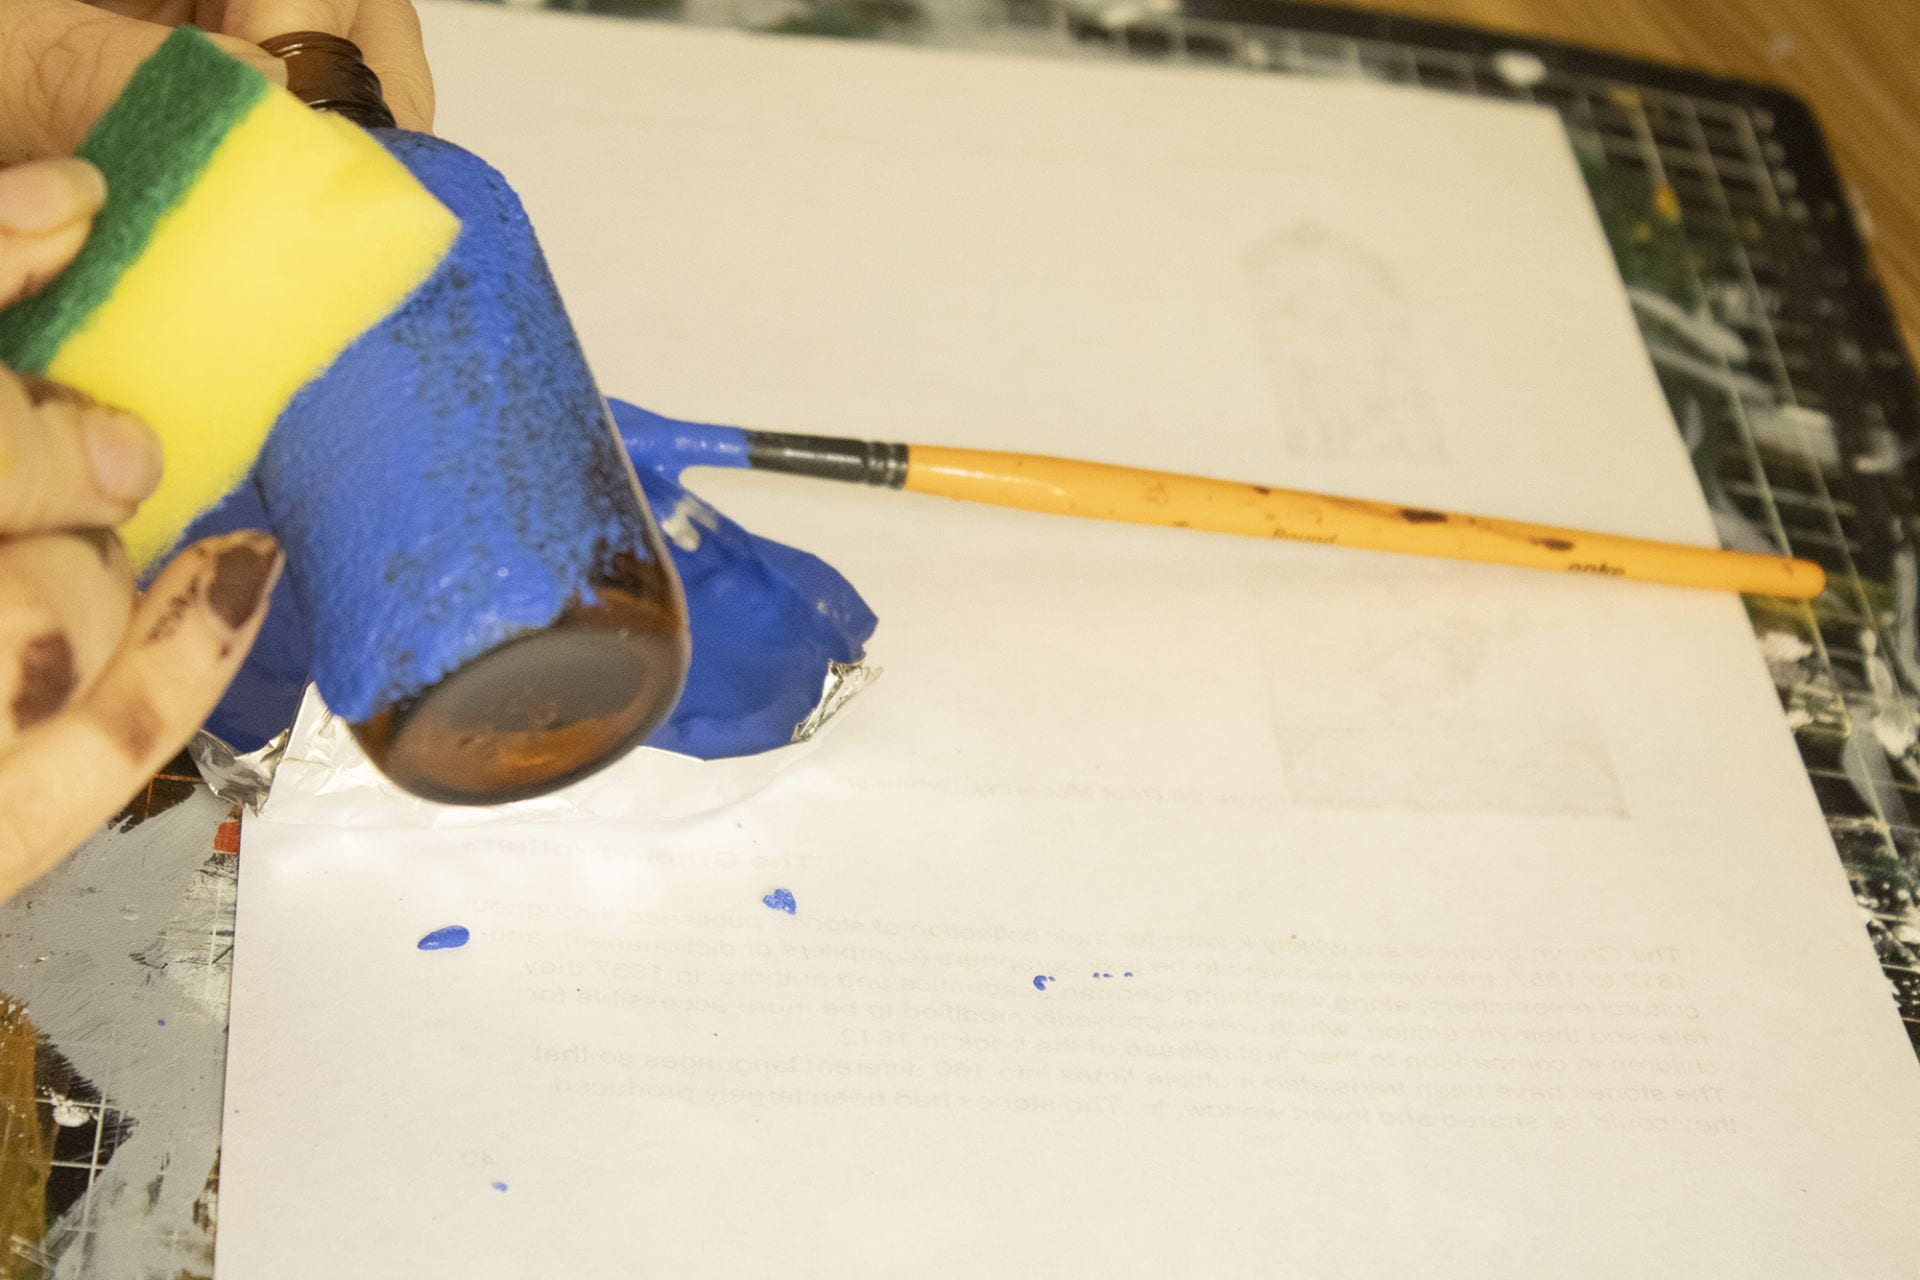 Using a sponge to apply blue paint to a glass bottle